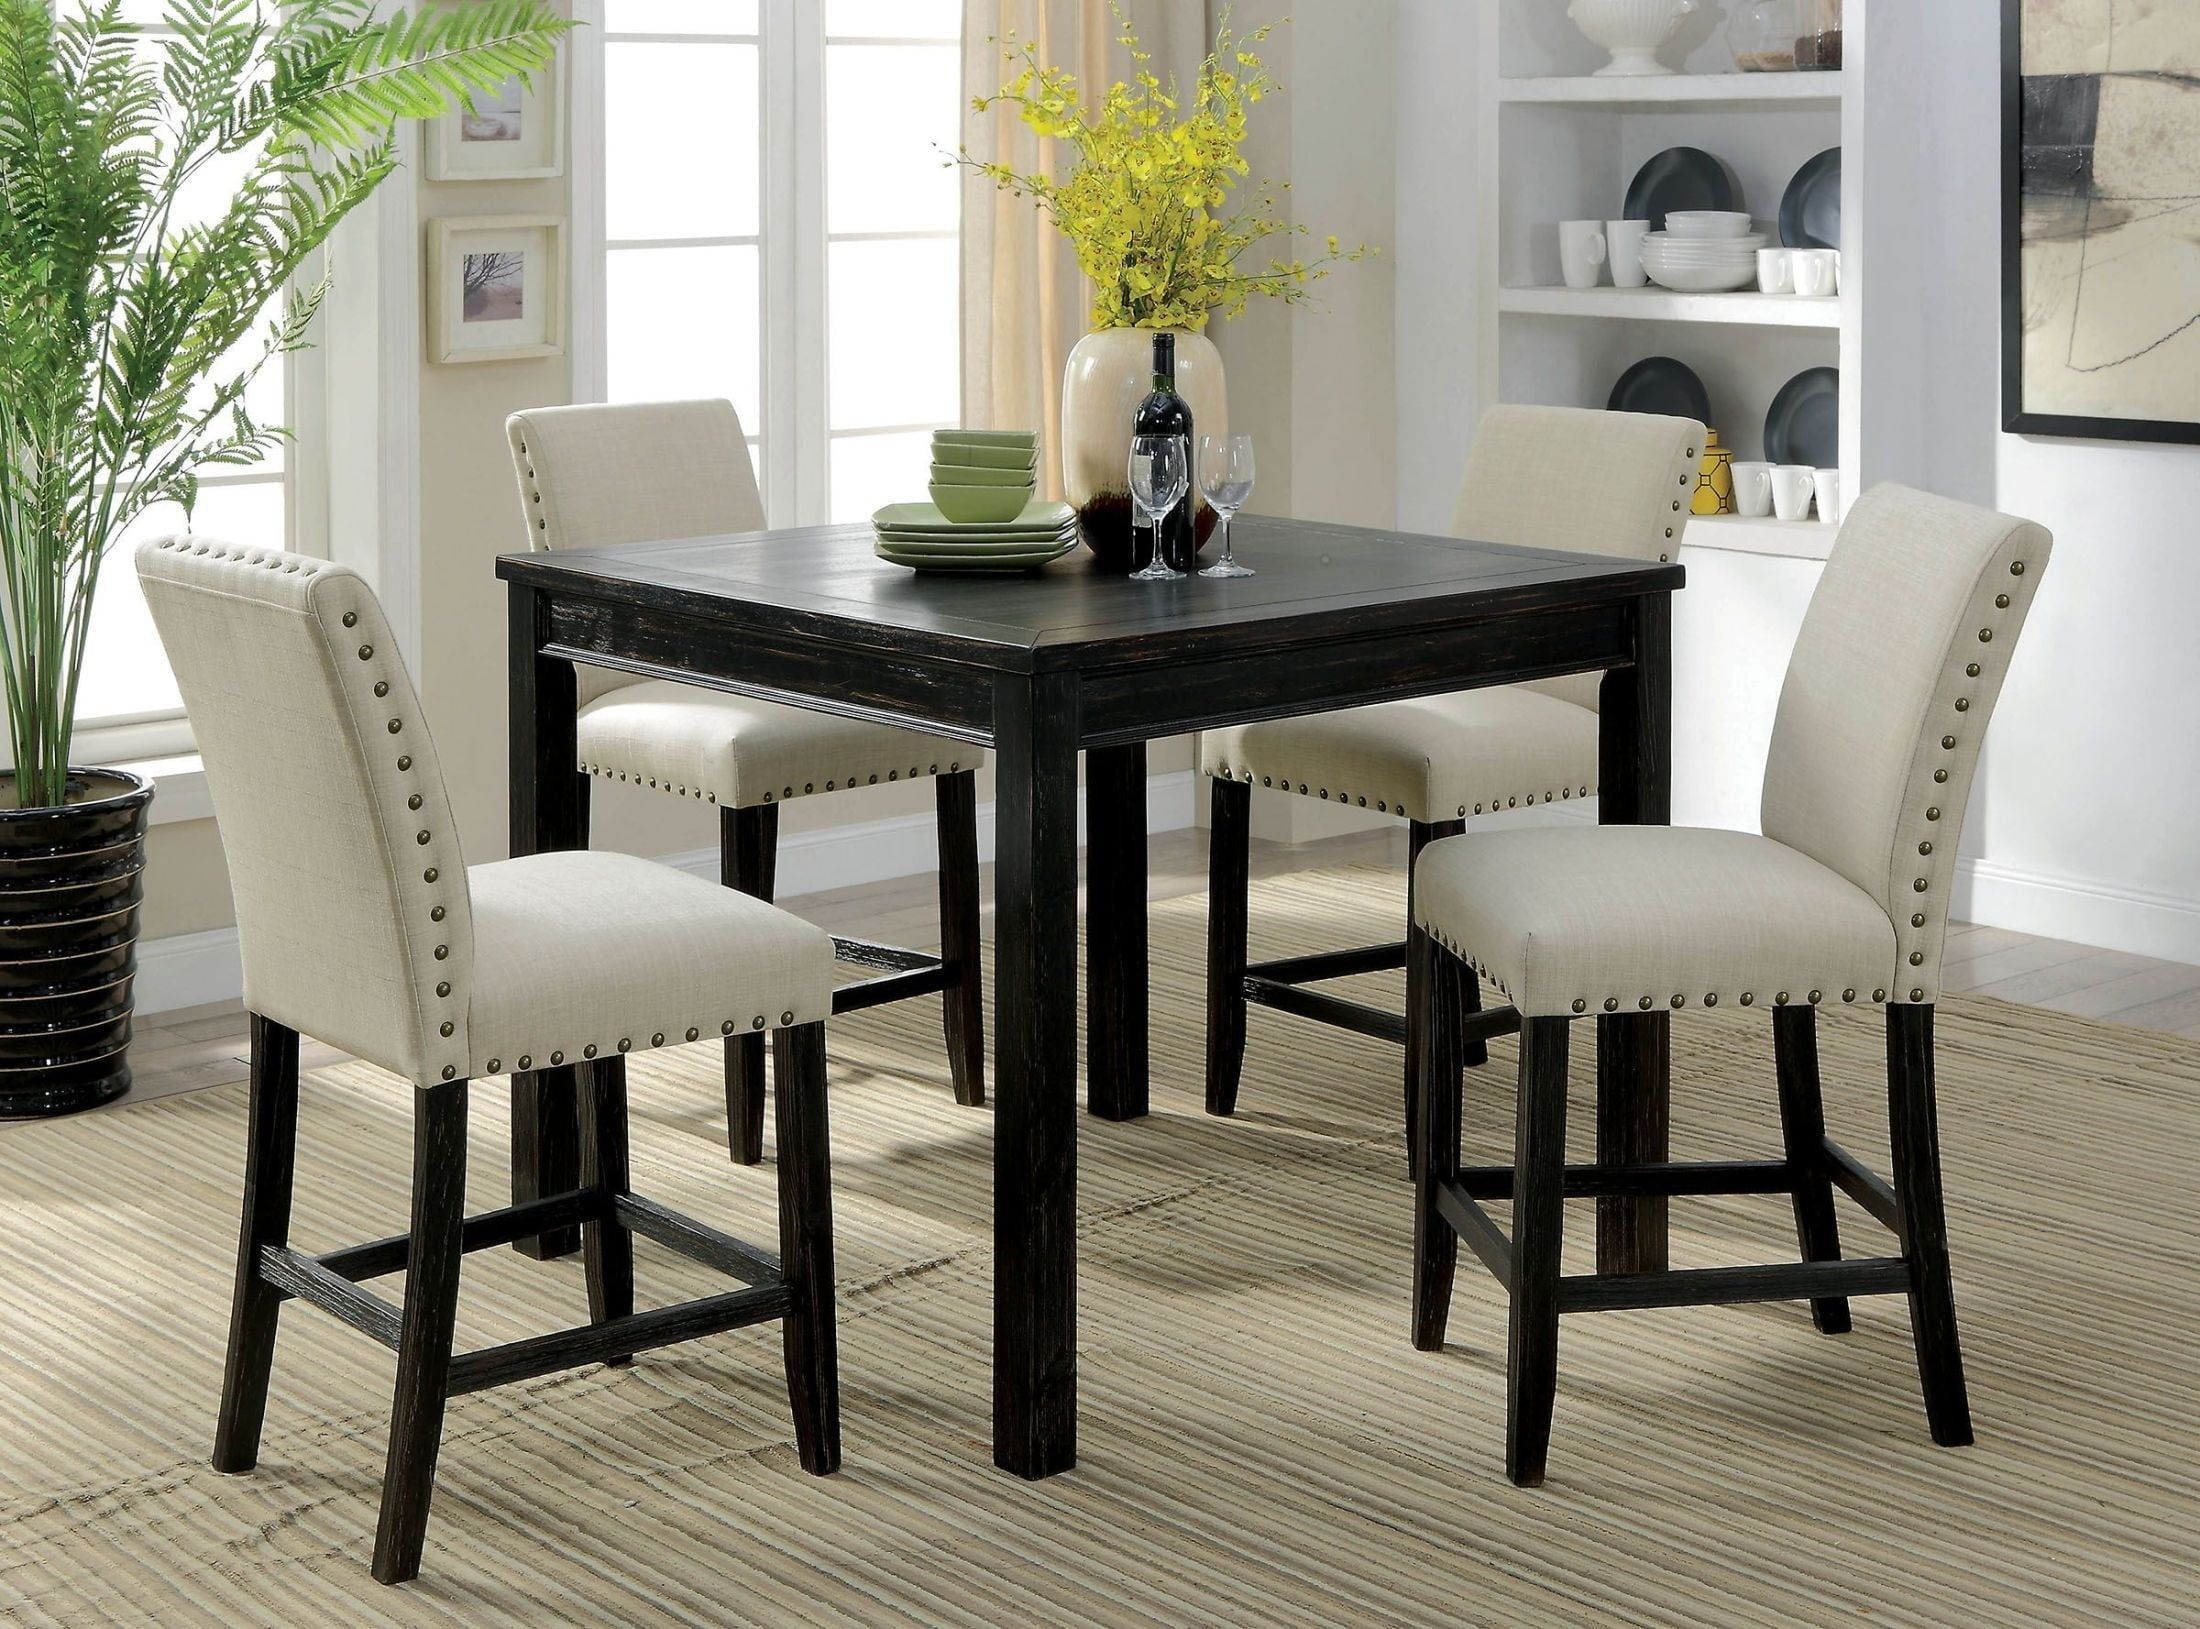 Kristie Antique Black Counter Height Dining Table Set From With 2017 Hearne Counter Height Dining Tables (View 5 of 15)